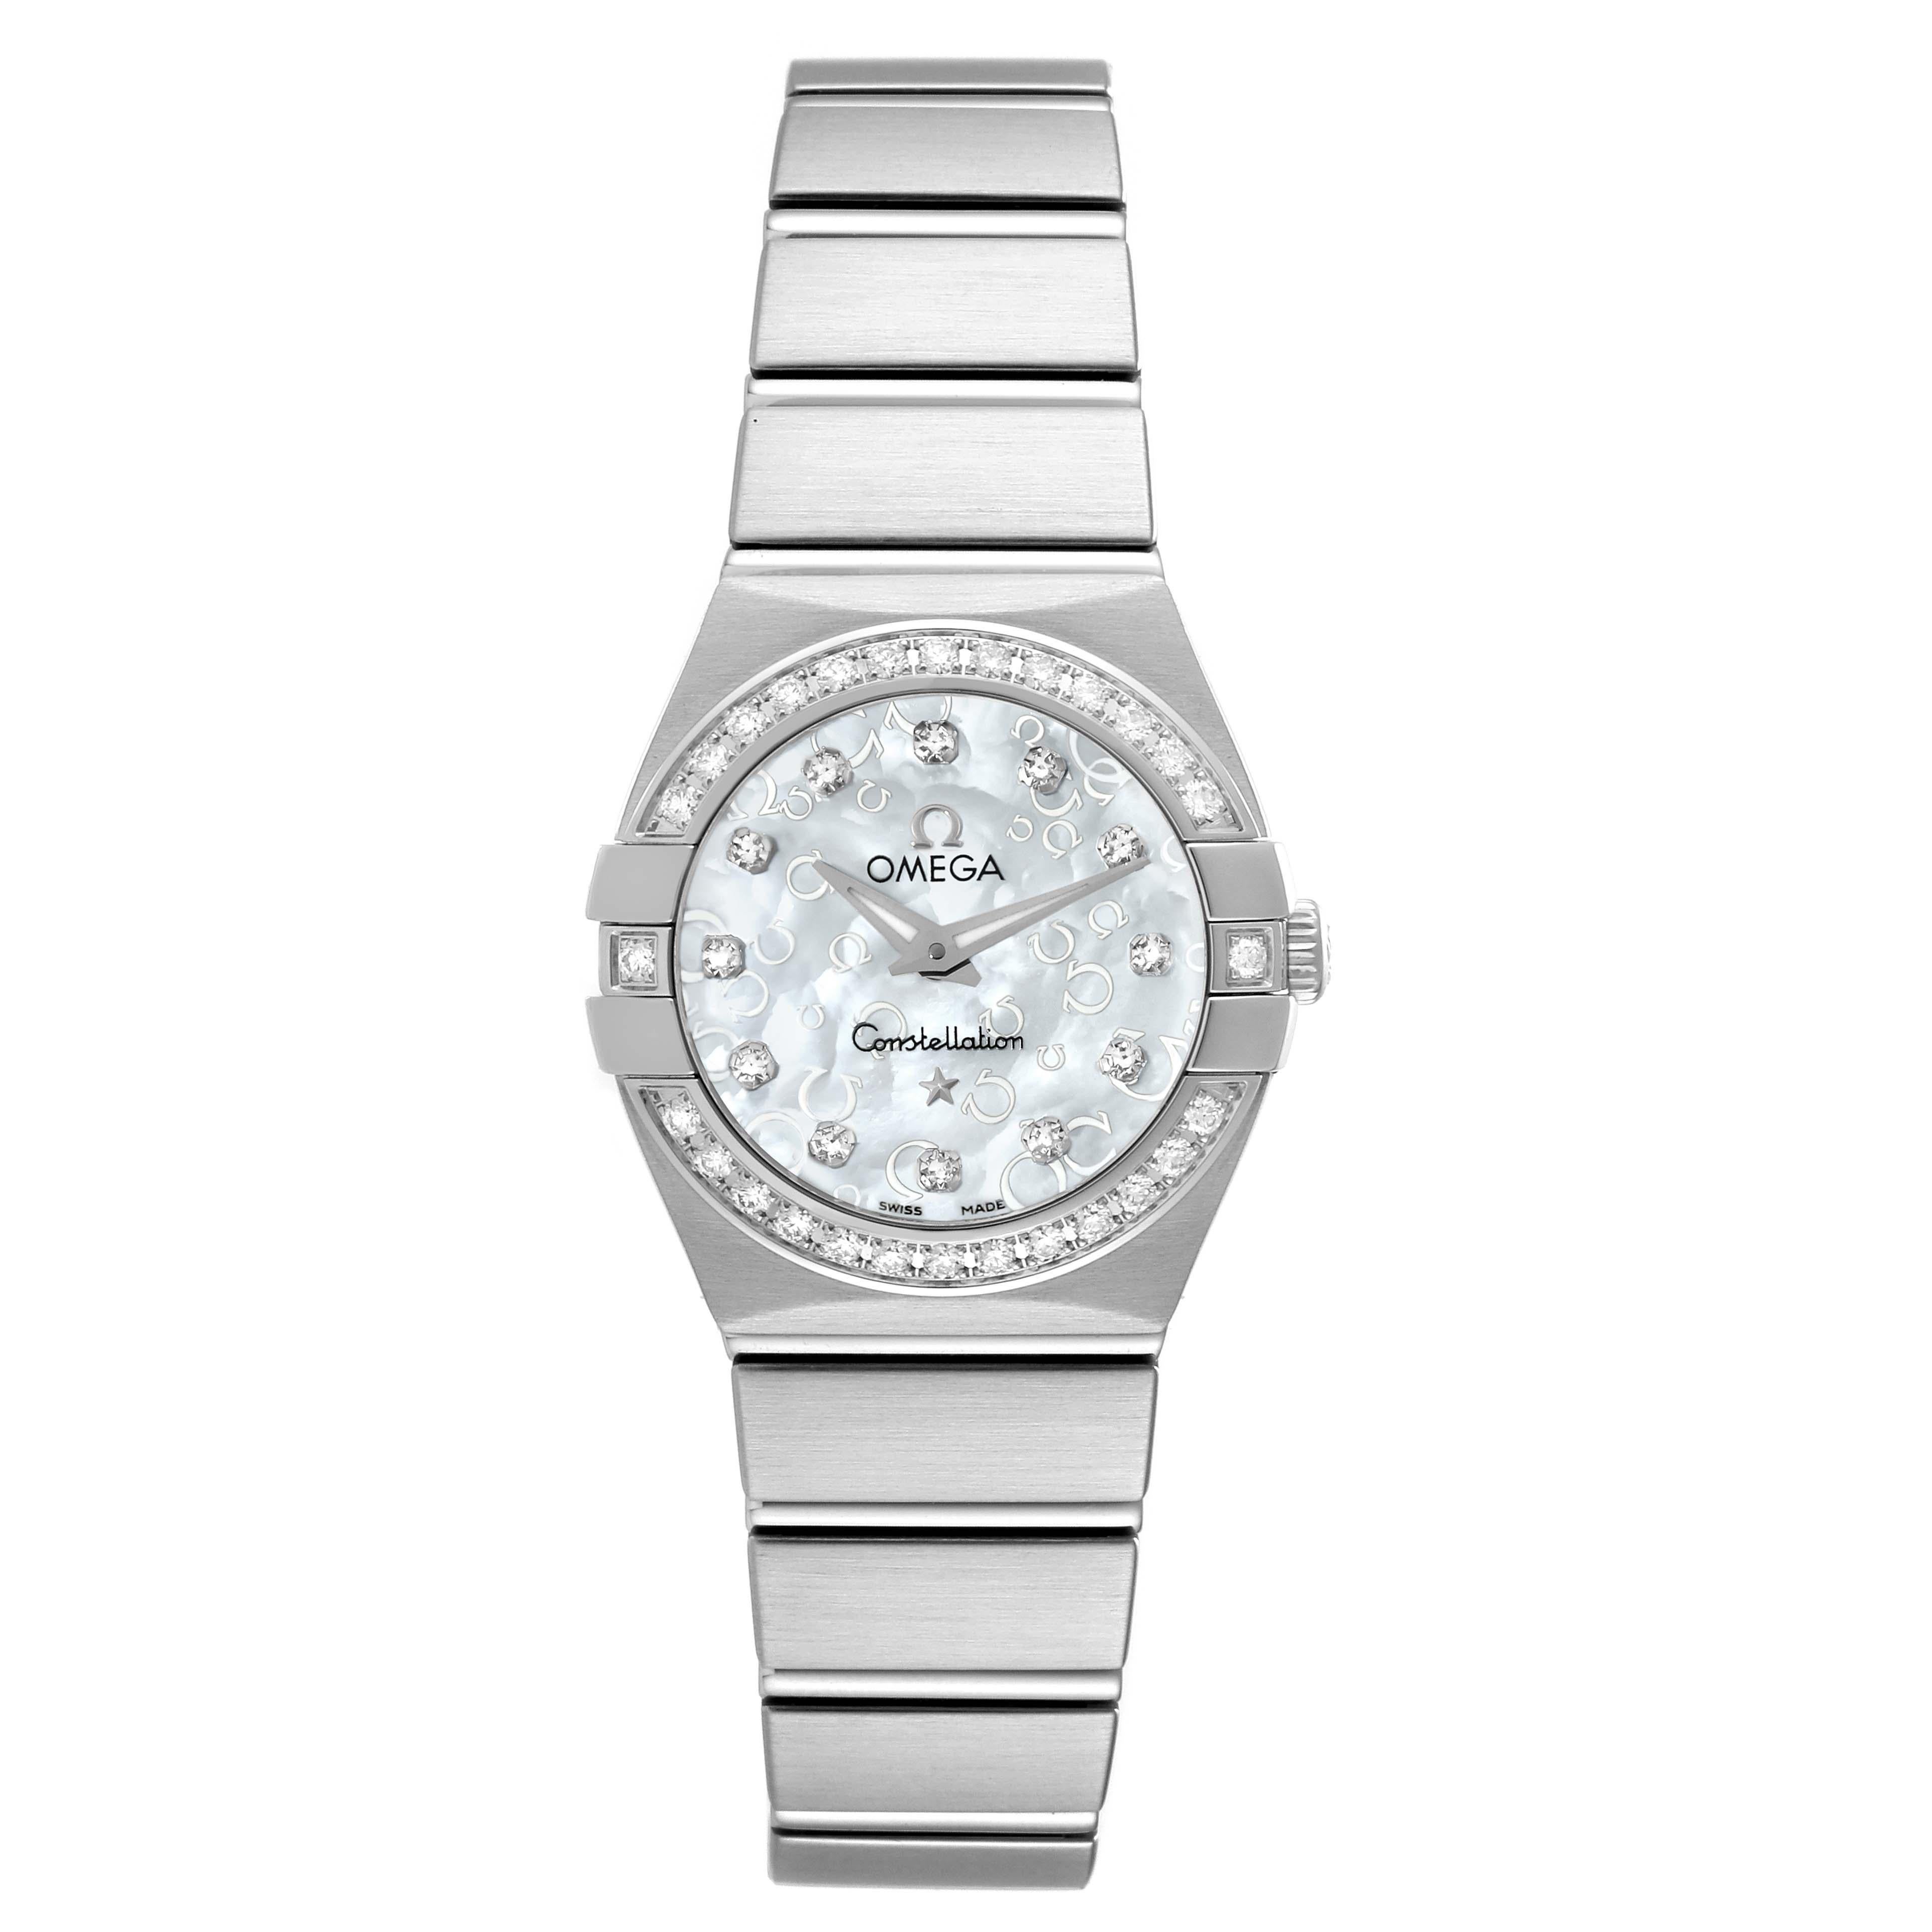 Omega Constellation Mother Of Pearl Diamond Steel Ladies Watch 123.15.24.60.52.001. Quartz movement. Stainless steel brushed round case 24mm in diameter. Stainless steel original Omega factory diamond bezel. Scratch resistant sapphire crystal.